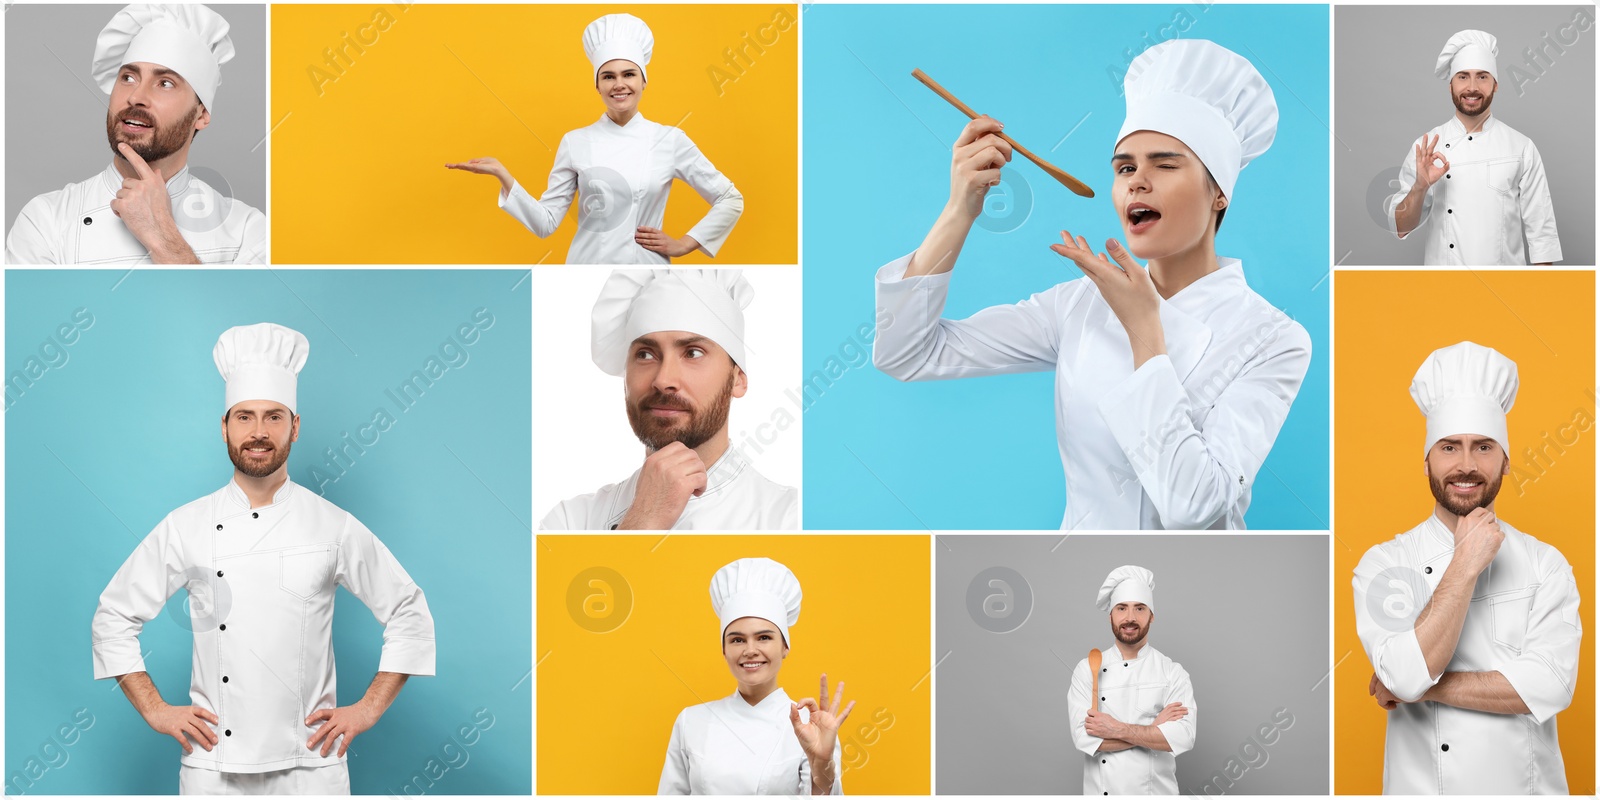 Image of Chefs in uniforms on different color backgrounds, collage design